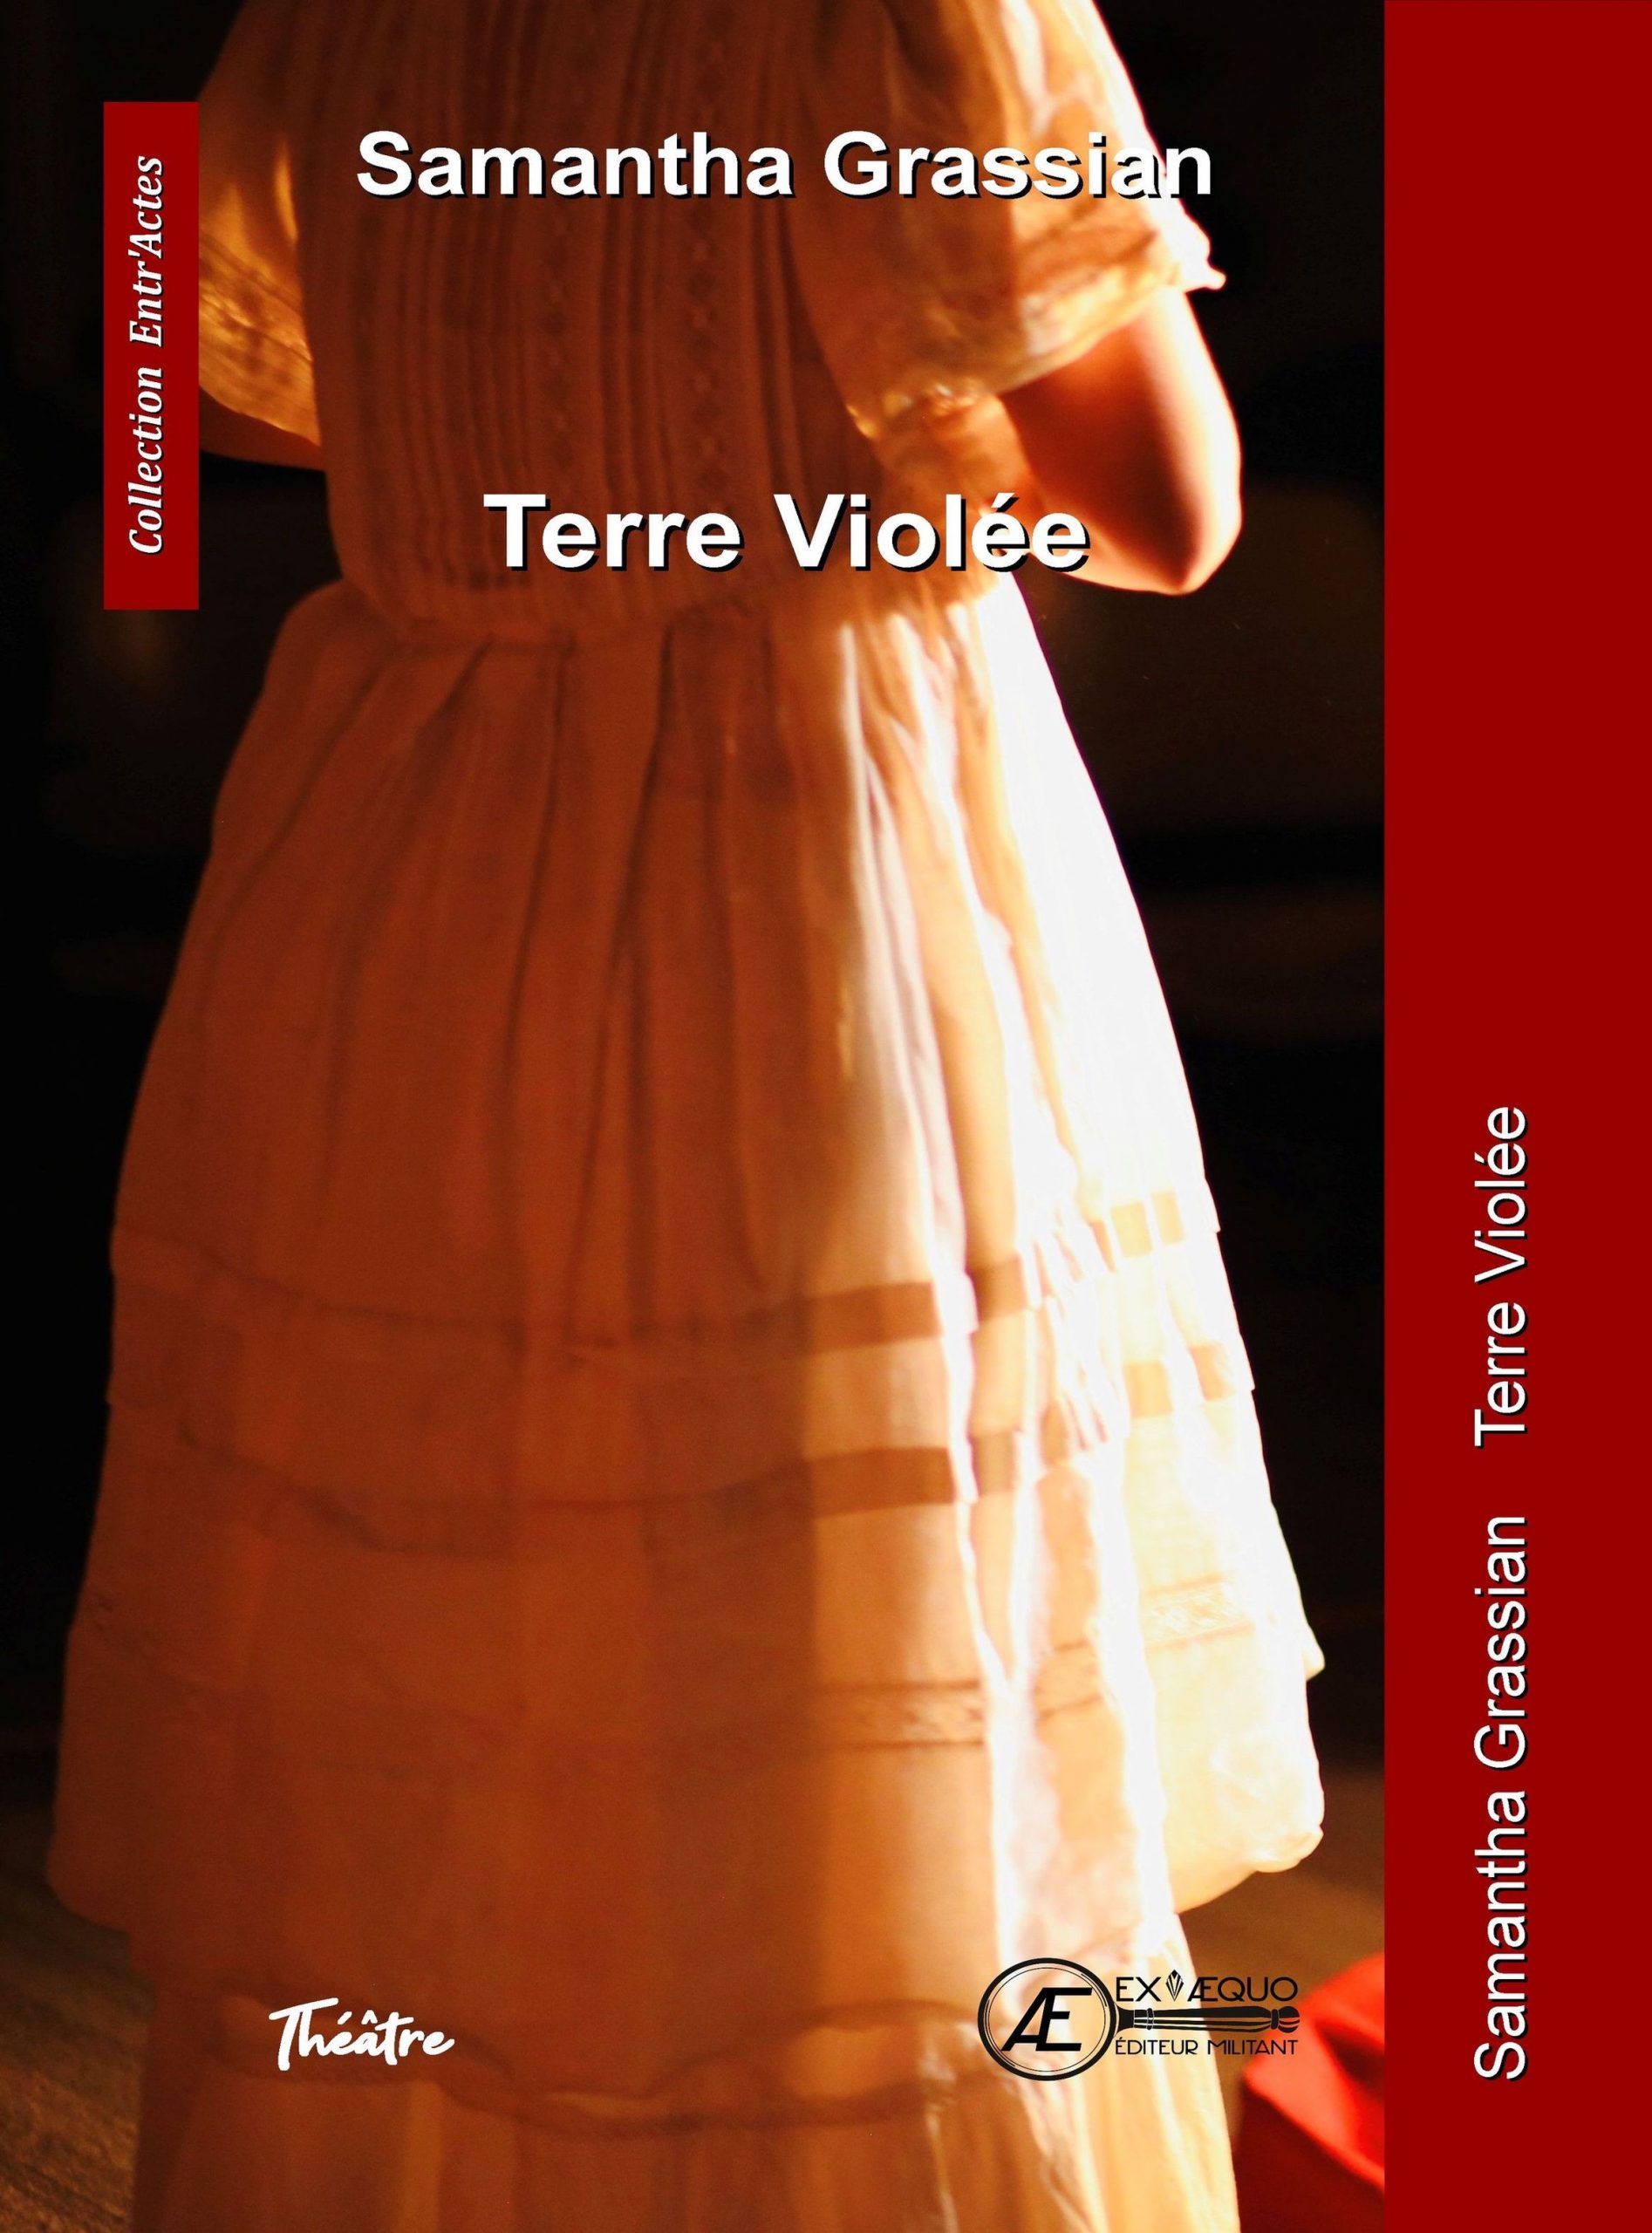 You are currently viewing Terre violée, de Samantha Grassian